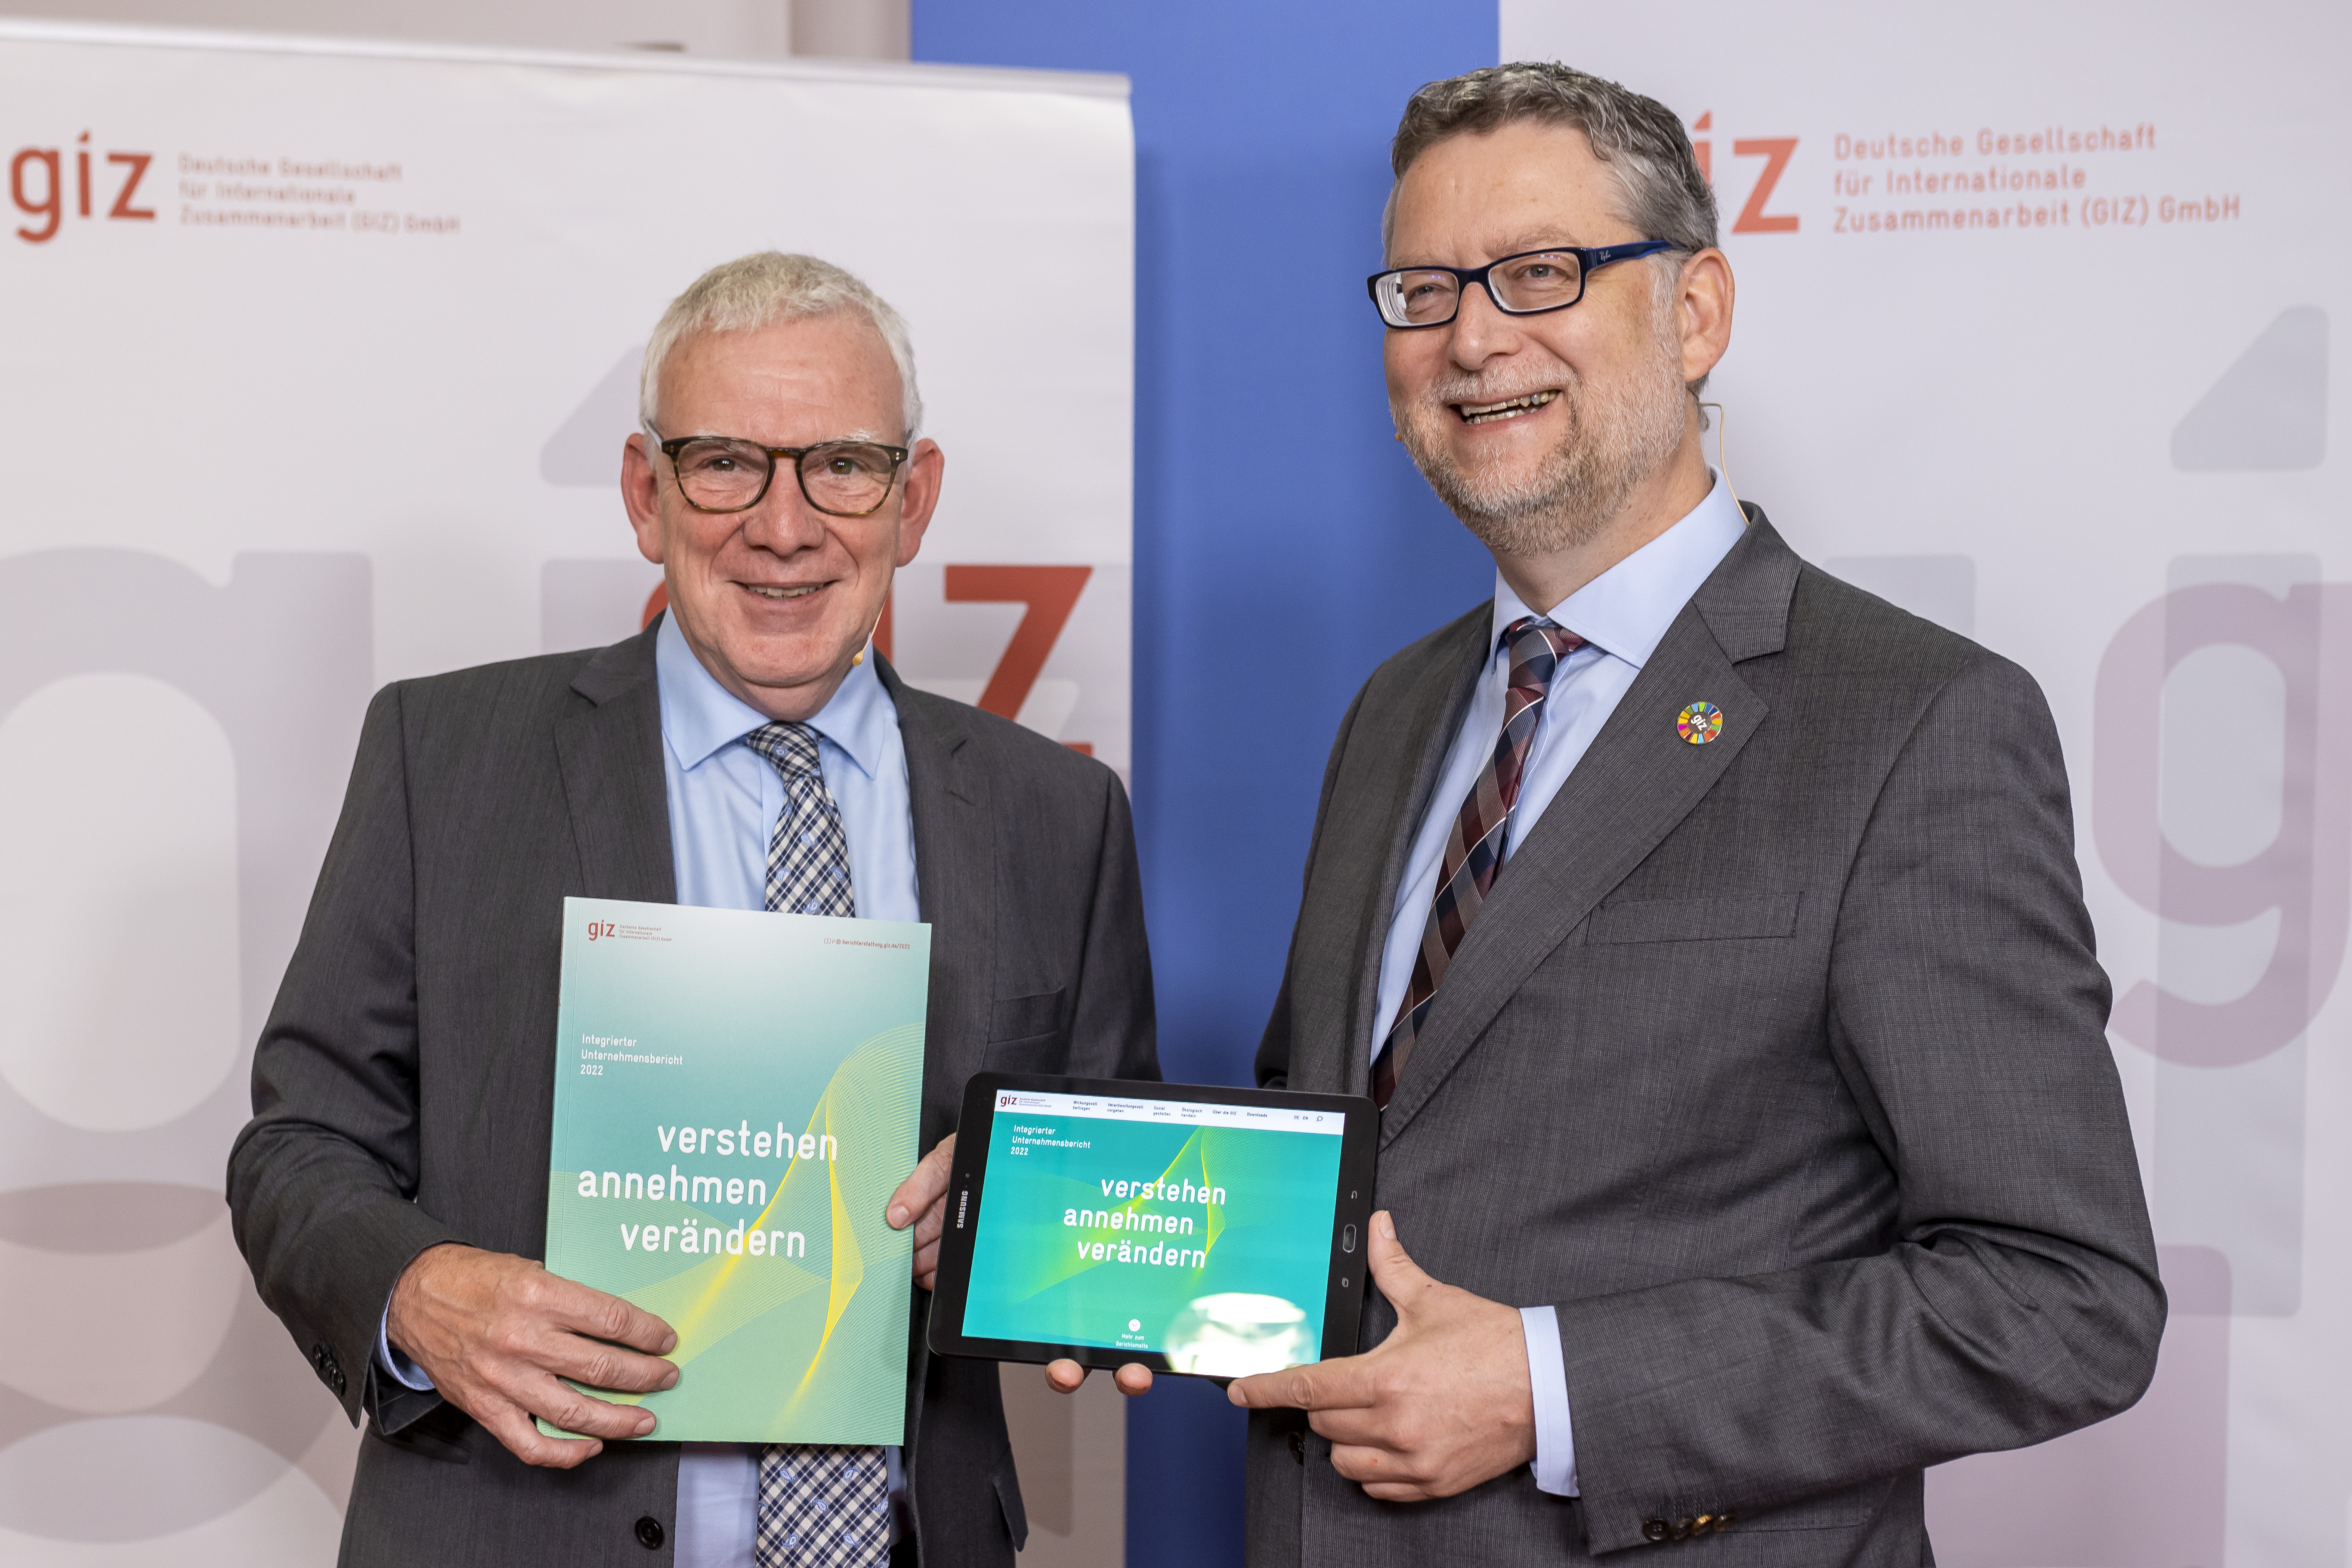 Jochen Flasbarth and Thorsten Schäfer-Gümbel in front of GIZ banners holding the GIZ Integrated Corporate Report 2022 in their hands.